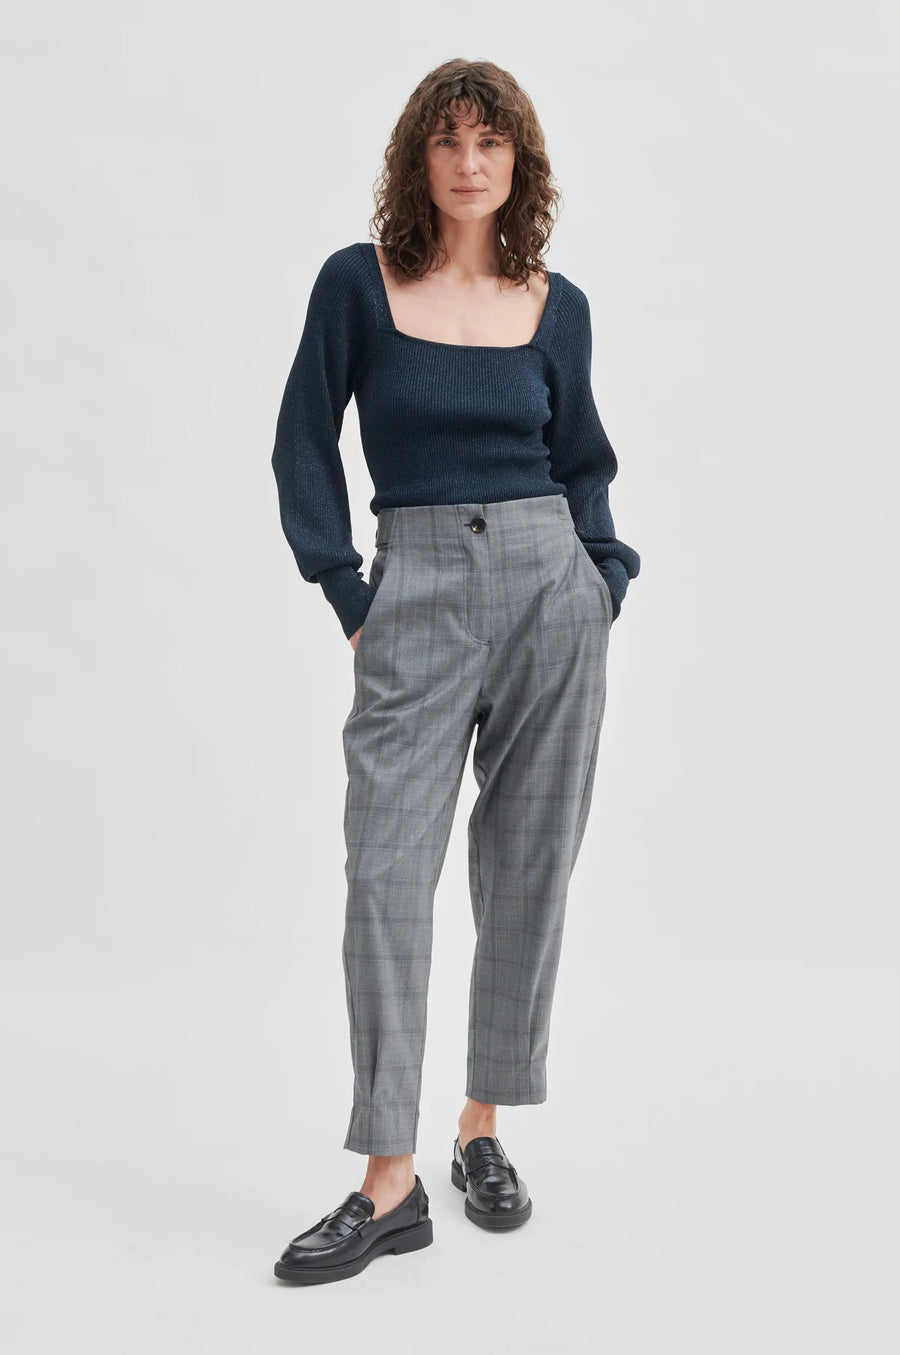 DRINKS TRACK TROUSERS - HOSE GLENCHECK IN GRAU